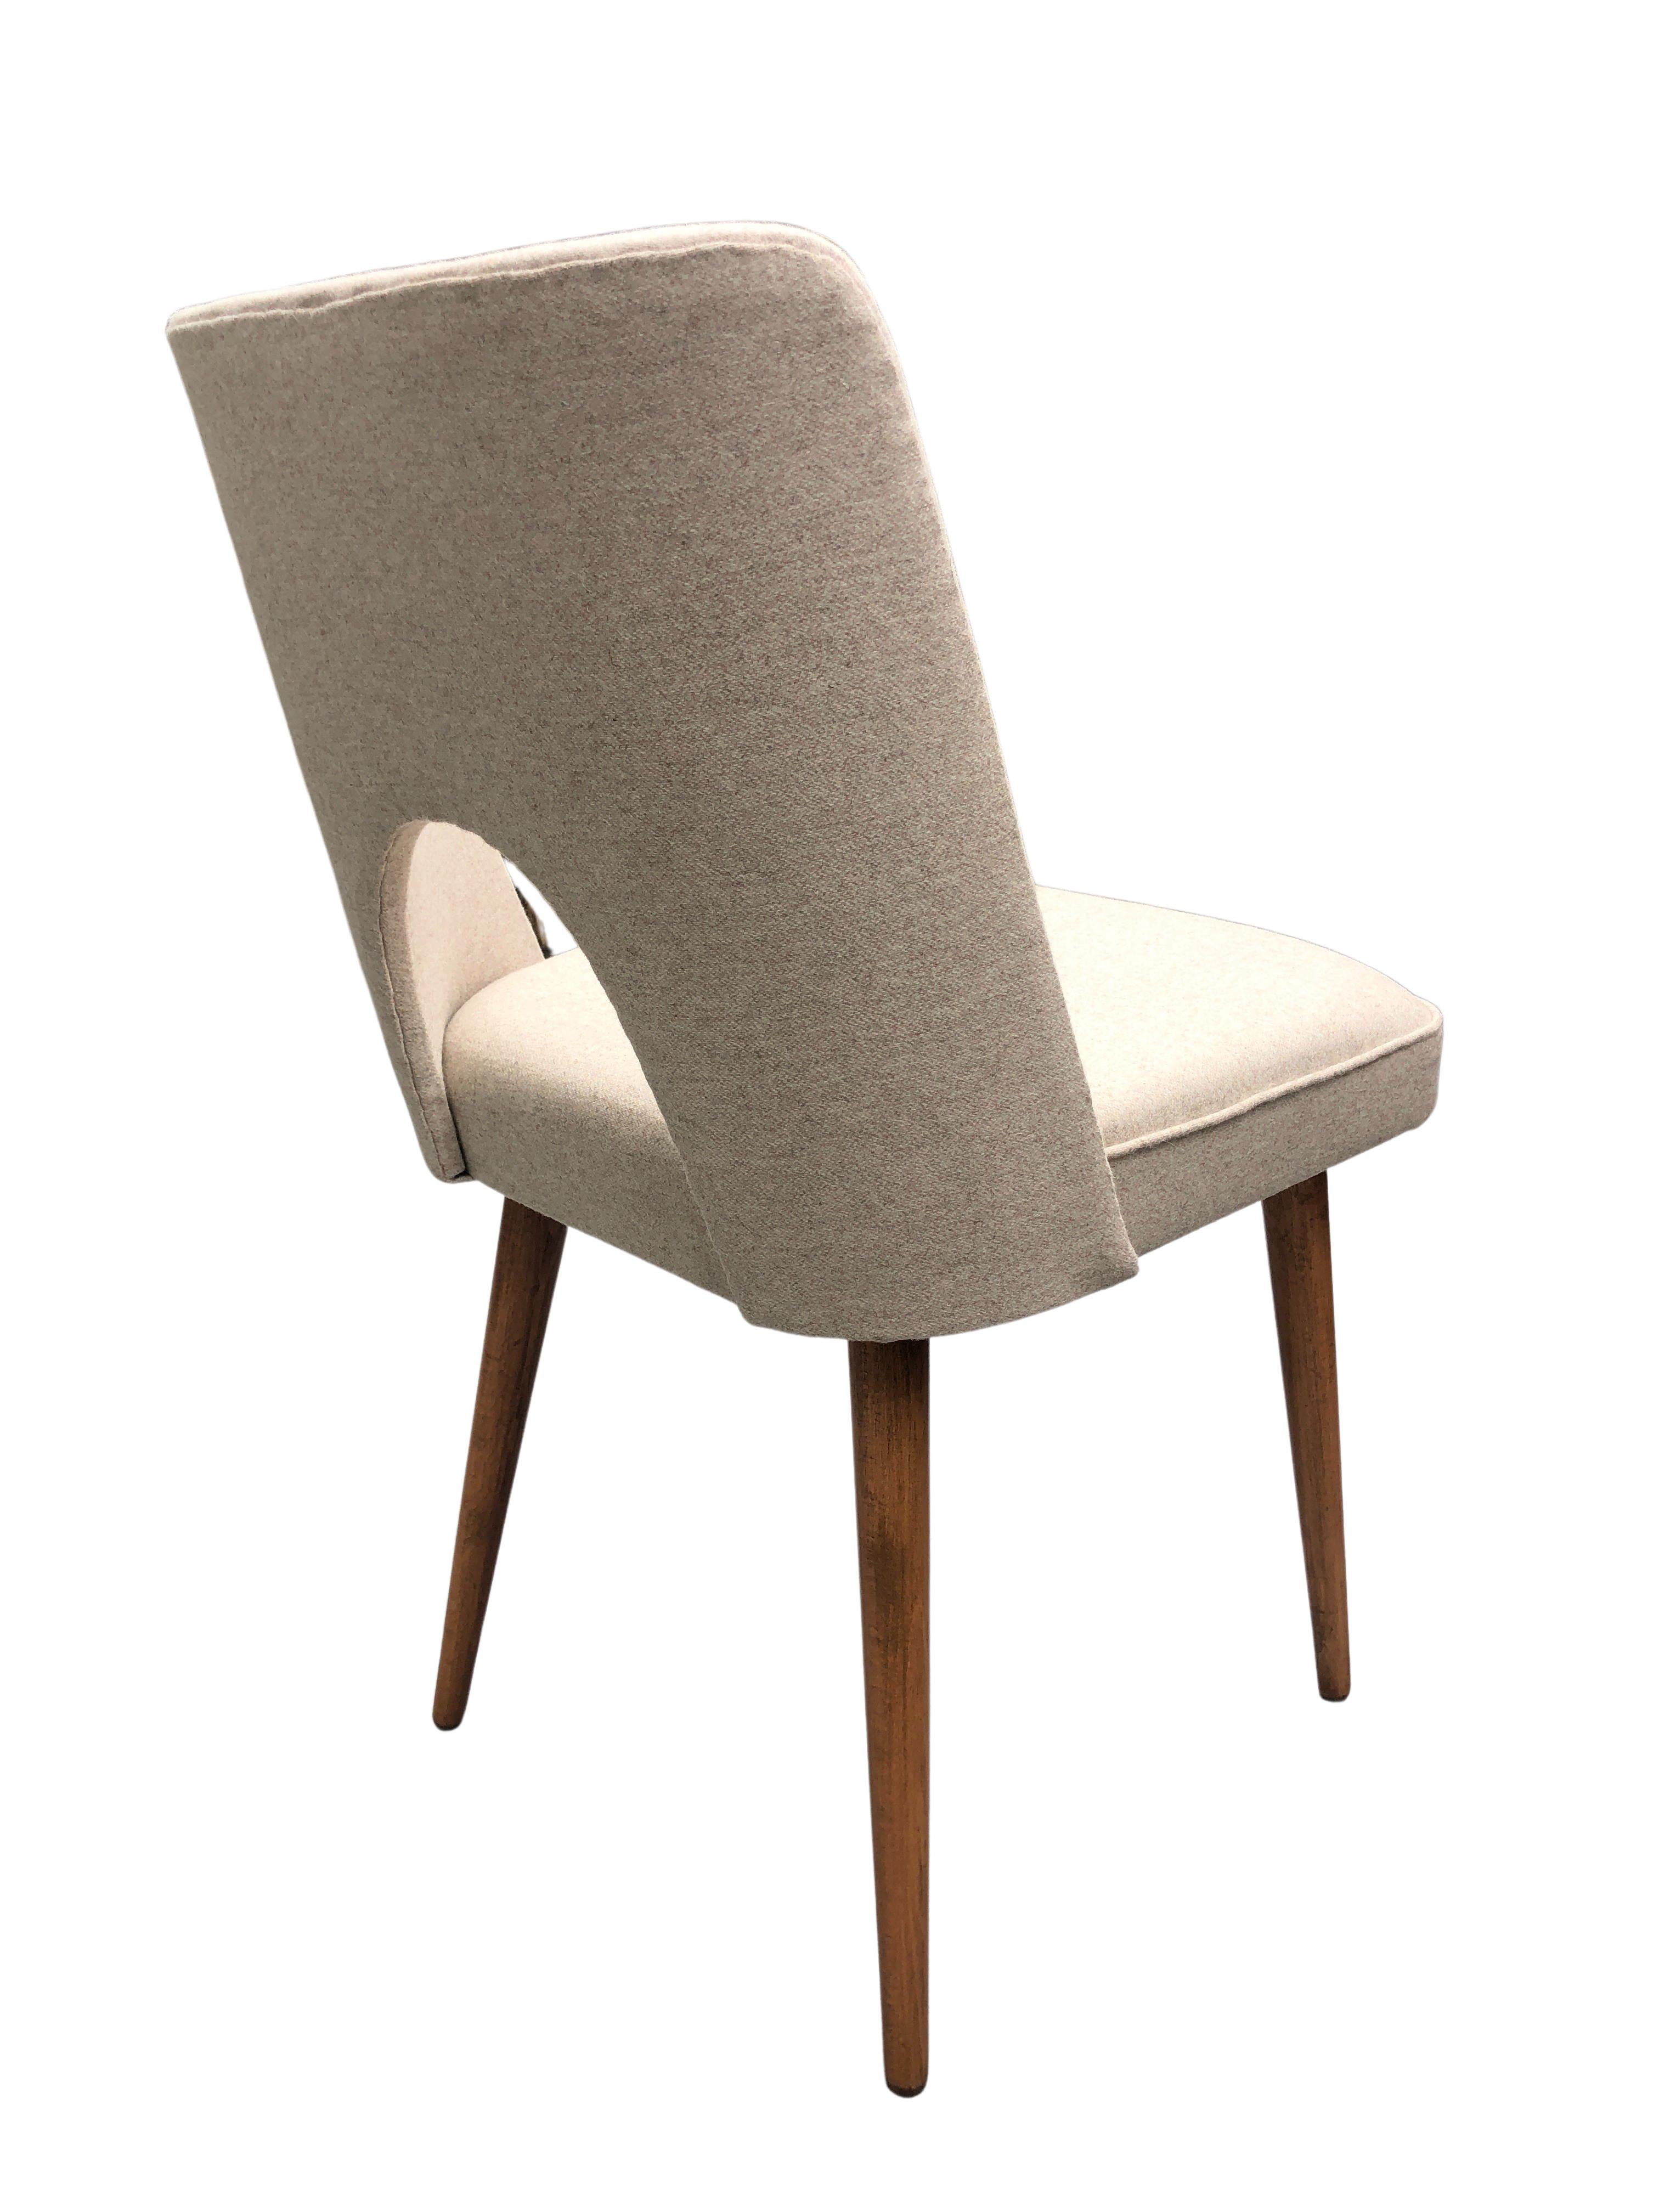 Hand-Crafted Beige Wool Shell Dining Chair by Lesniewski, 1960s For Sale